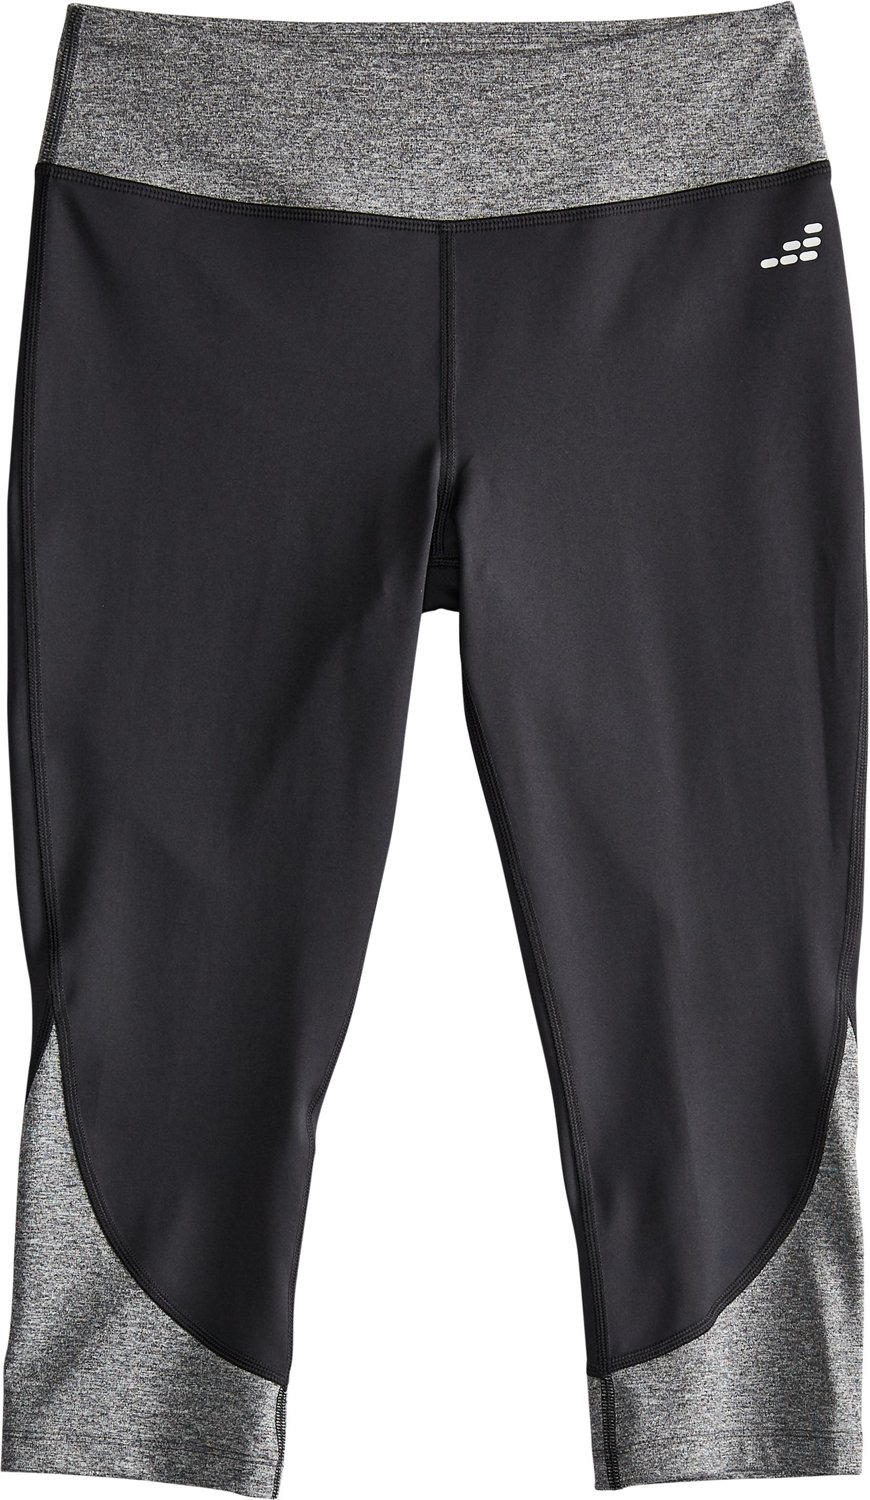 academy sports compression pants